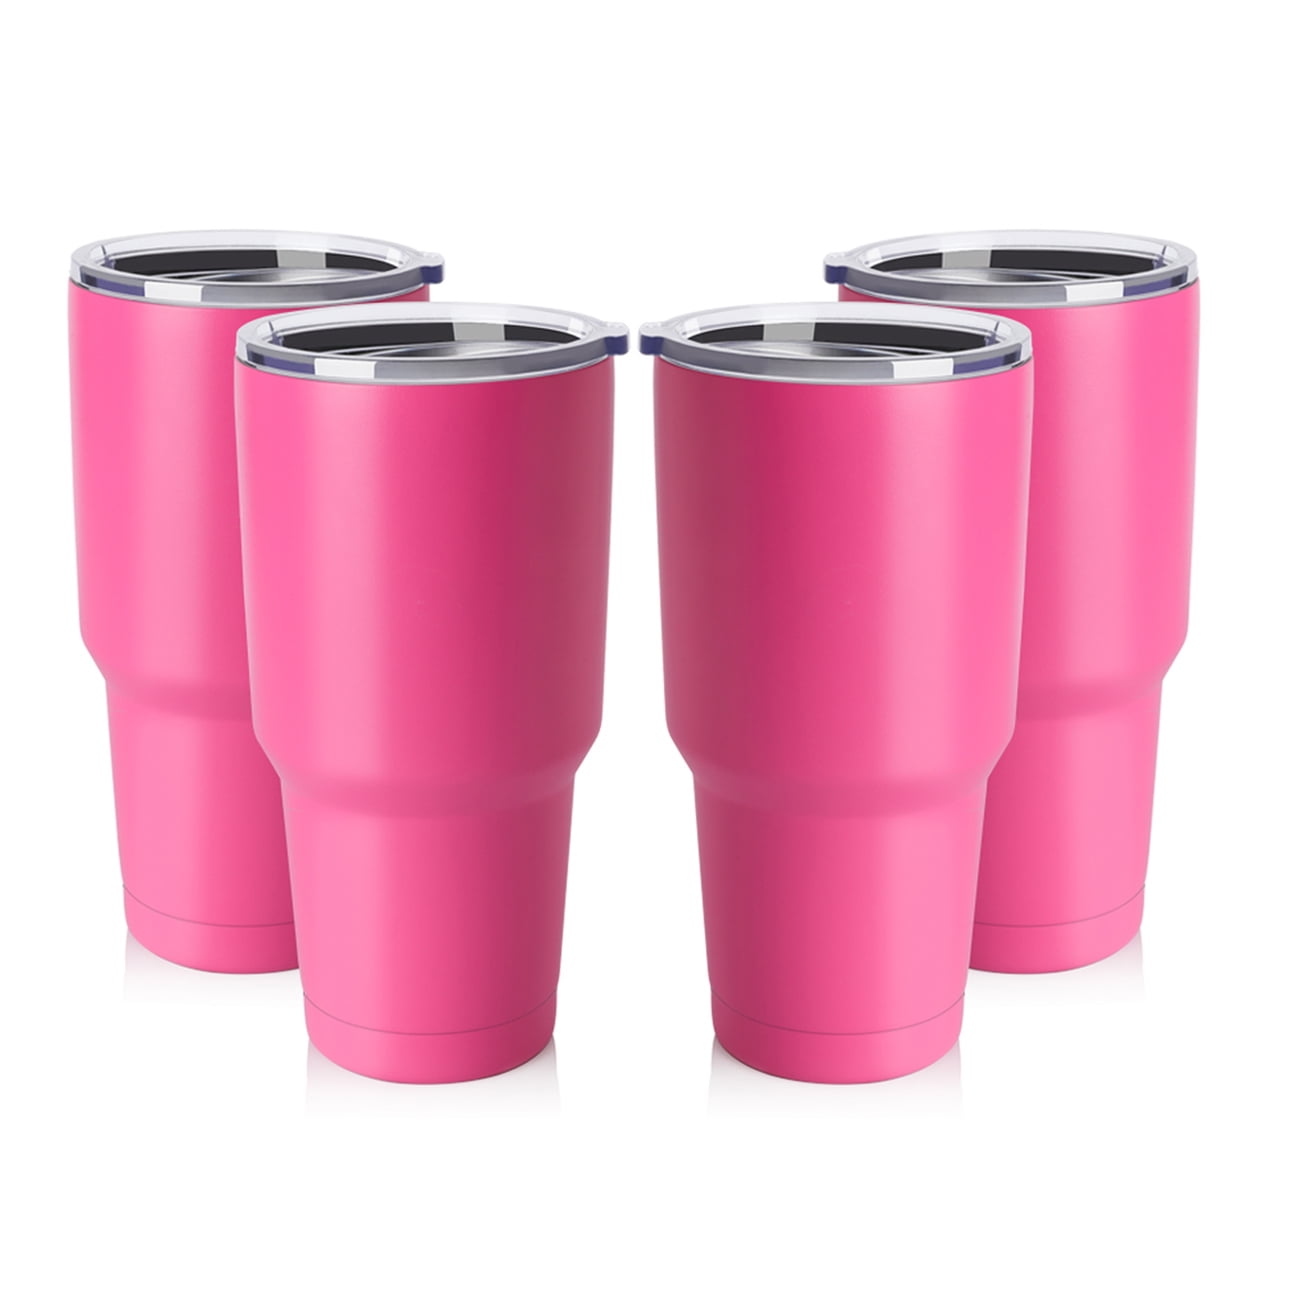 North Pink Stainless Steel Tumbler 5-Piece Set, 30 oz Vacuum Insulated, Travel Mug for Home, Office, School – Like Yeti Tumbler for Ice Drink & Hot